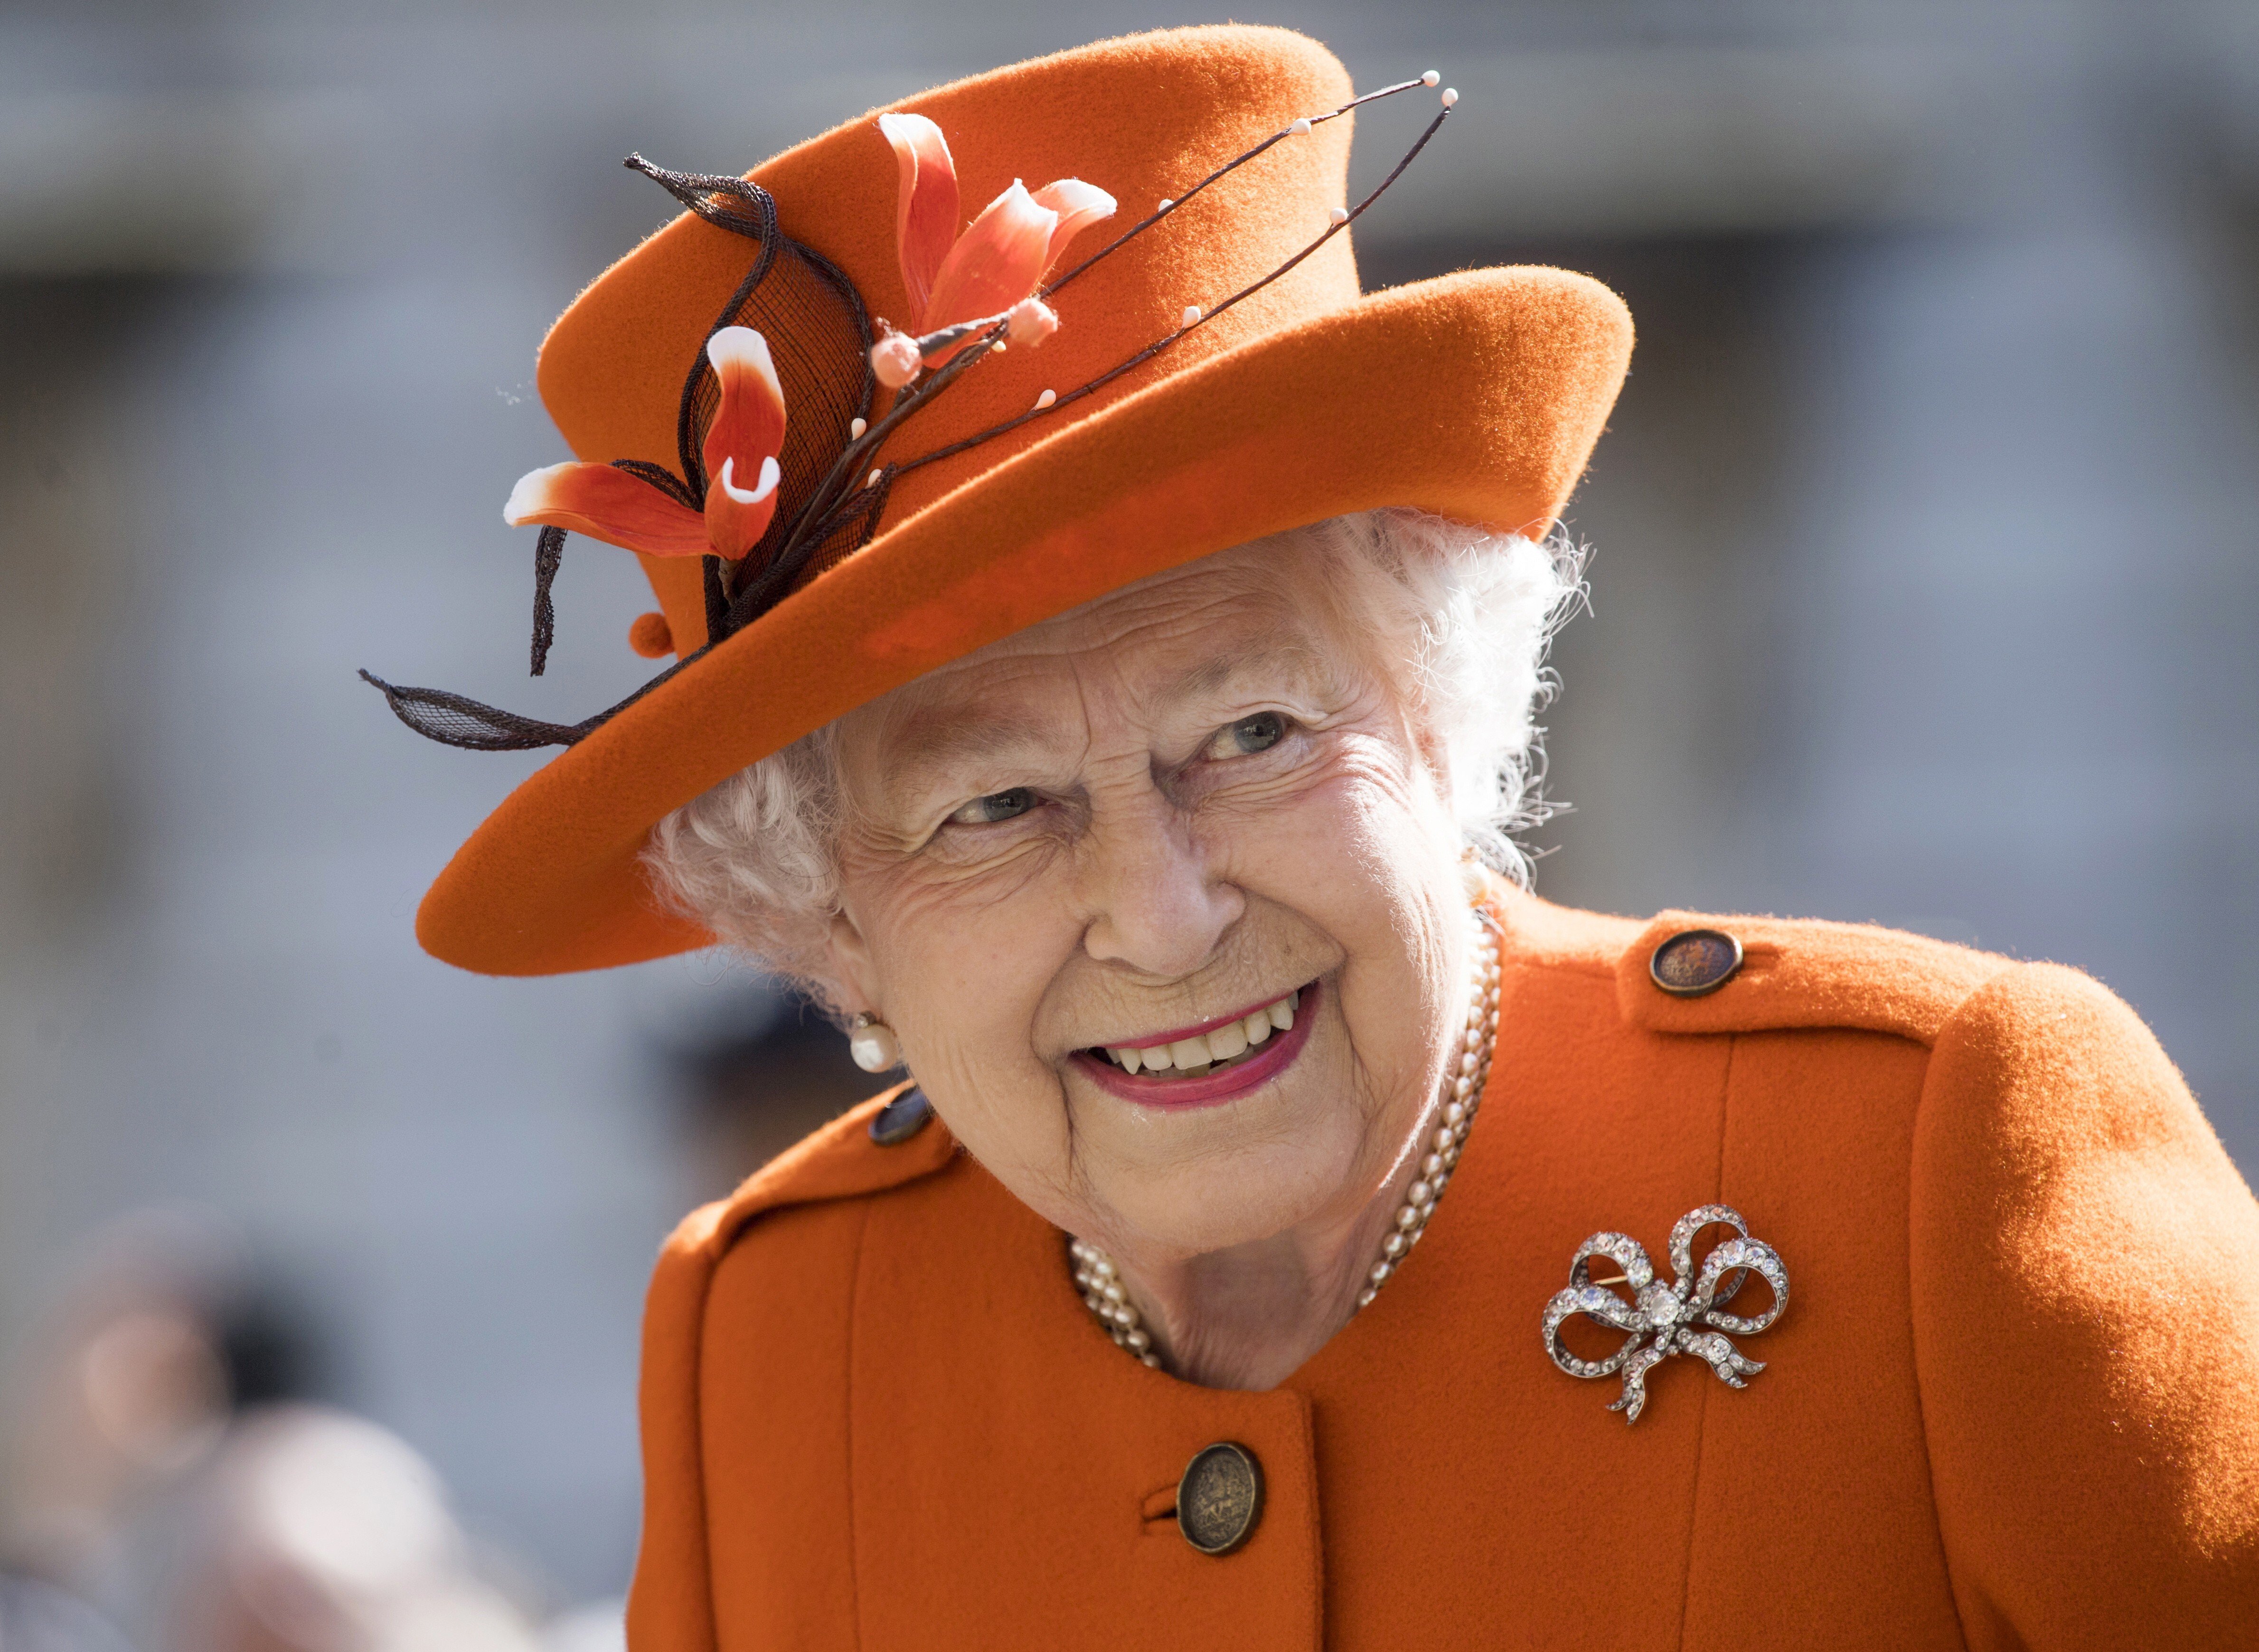 Britain's Queen Elizabeth may be 94 years old, but her personal style remains timeless with brands like Balmain, Valentino and Versace paying tribute to her in their latest collections. Photo: EPA-EFE